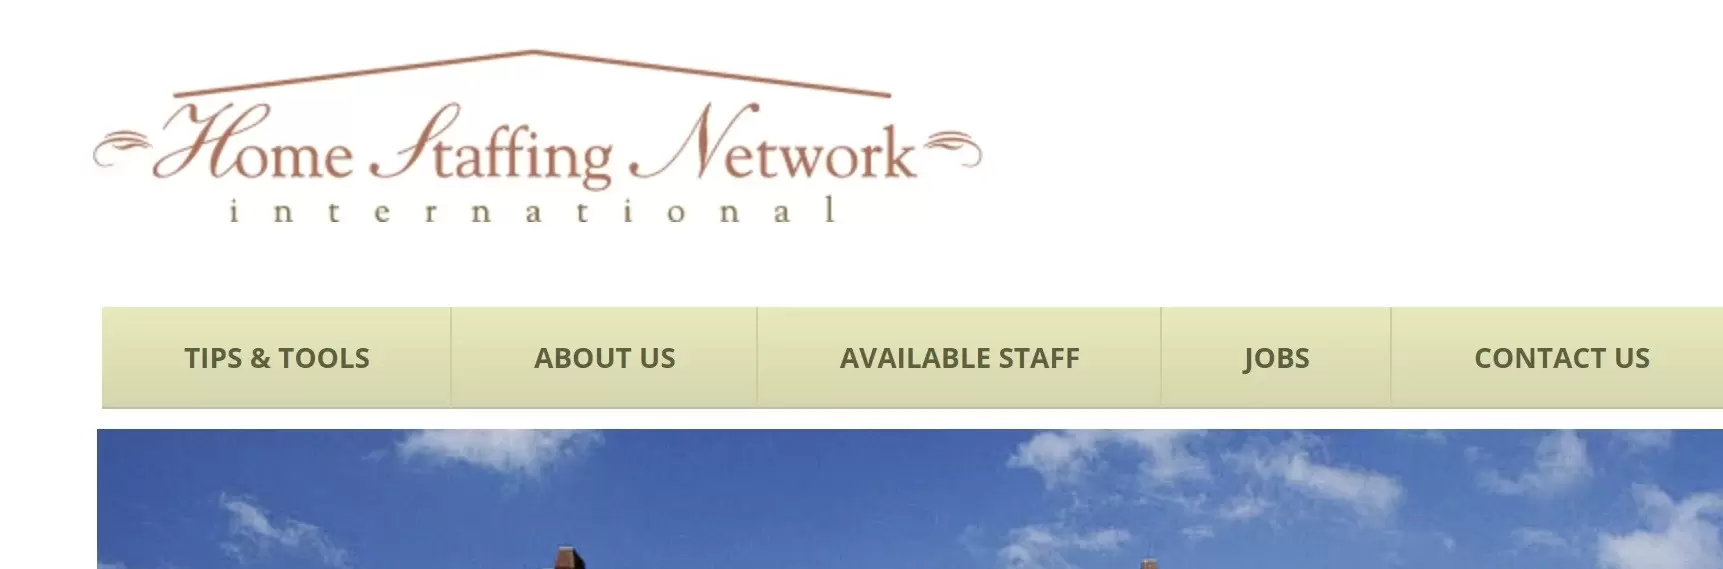 Home Staffing Network company profile and reviews